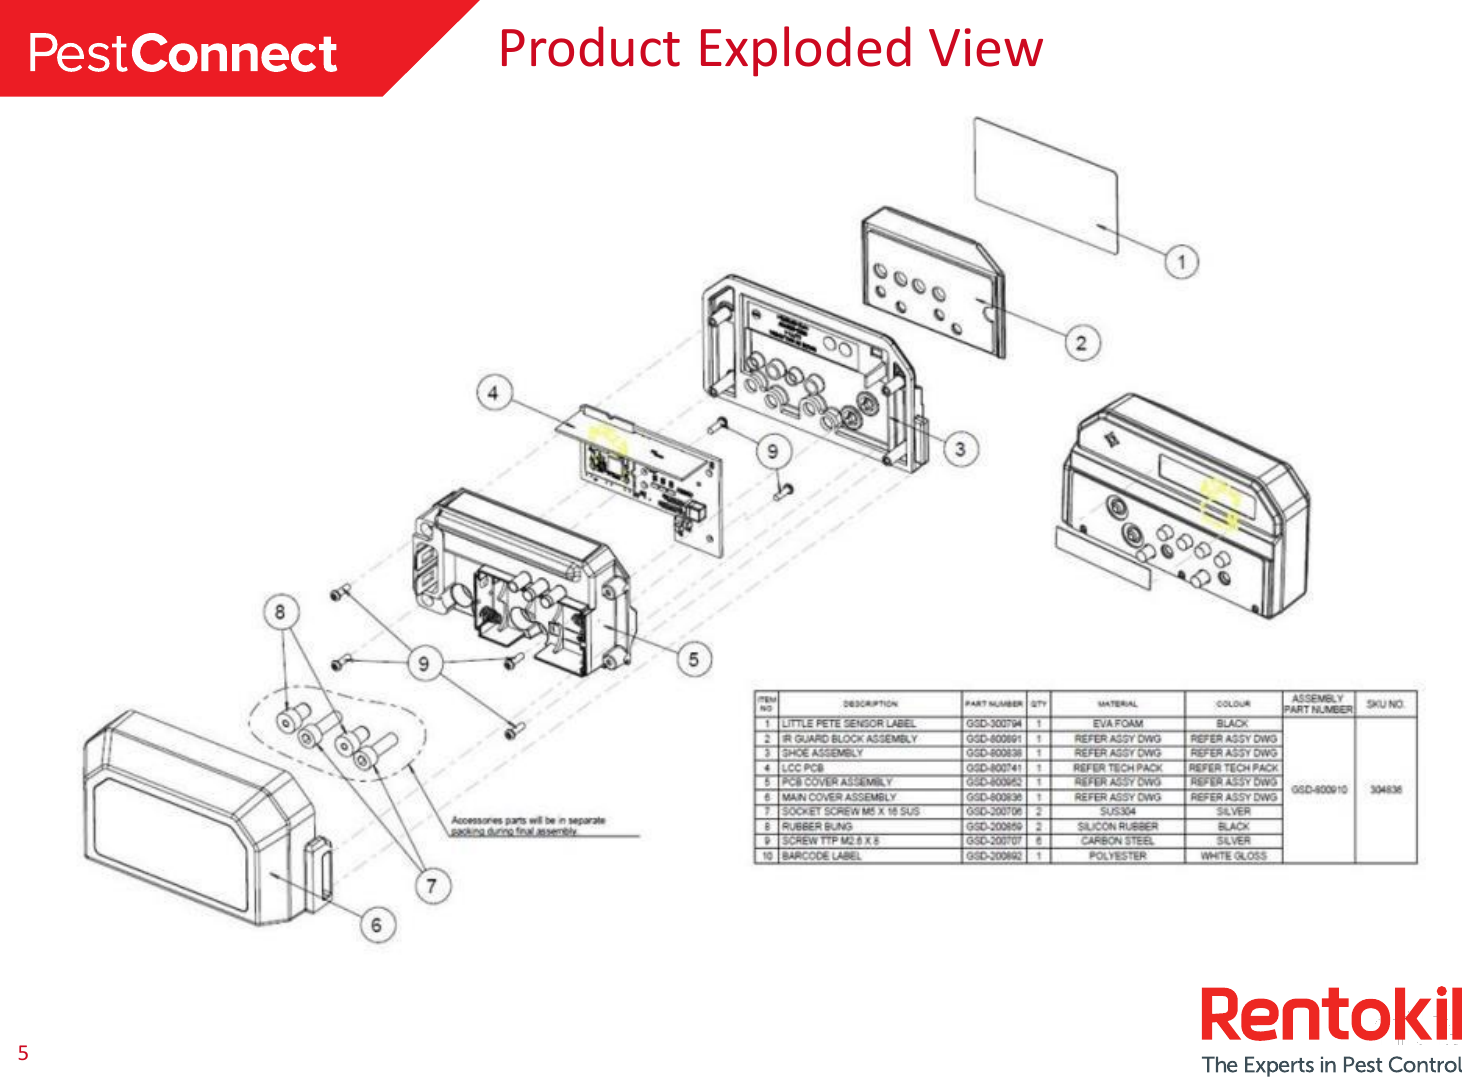 5Product Exploded View